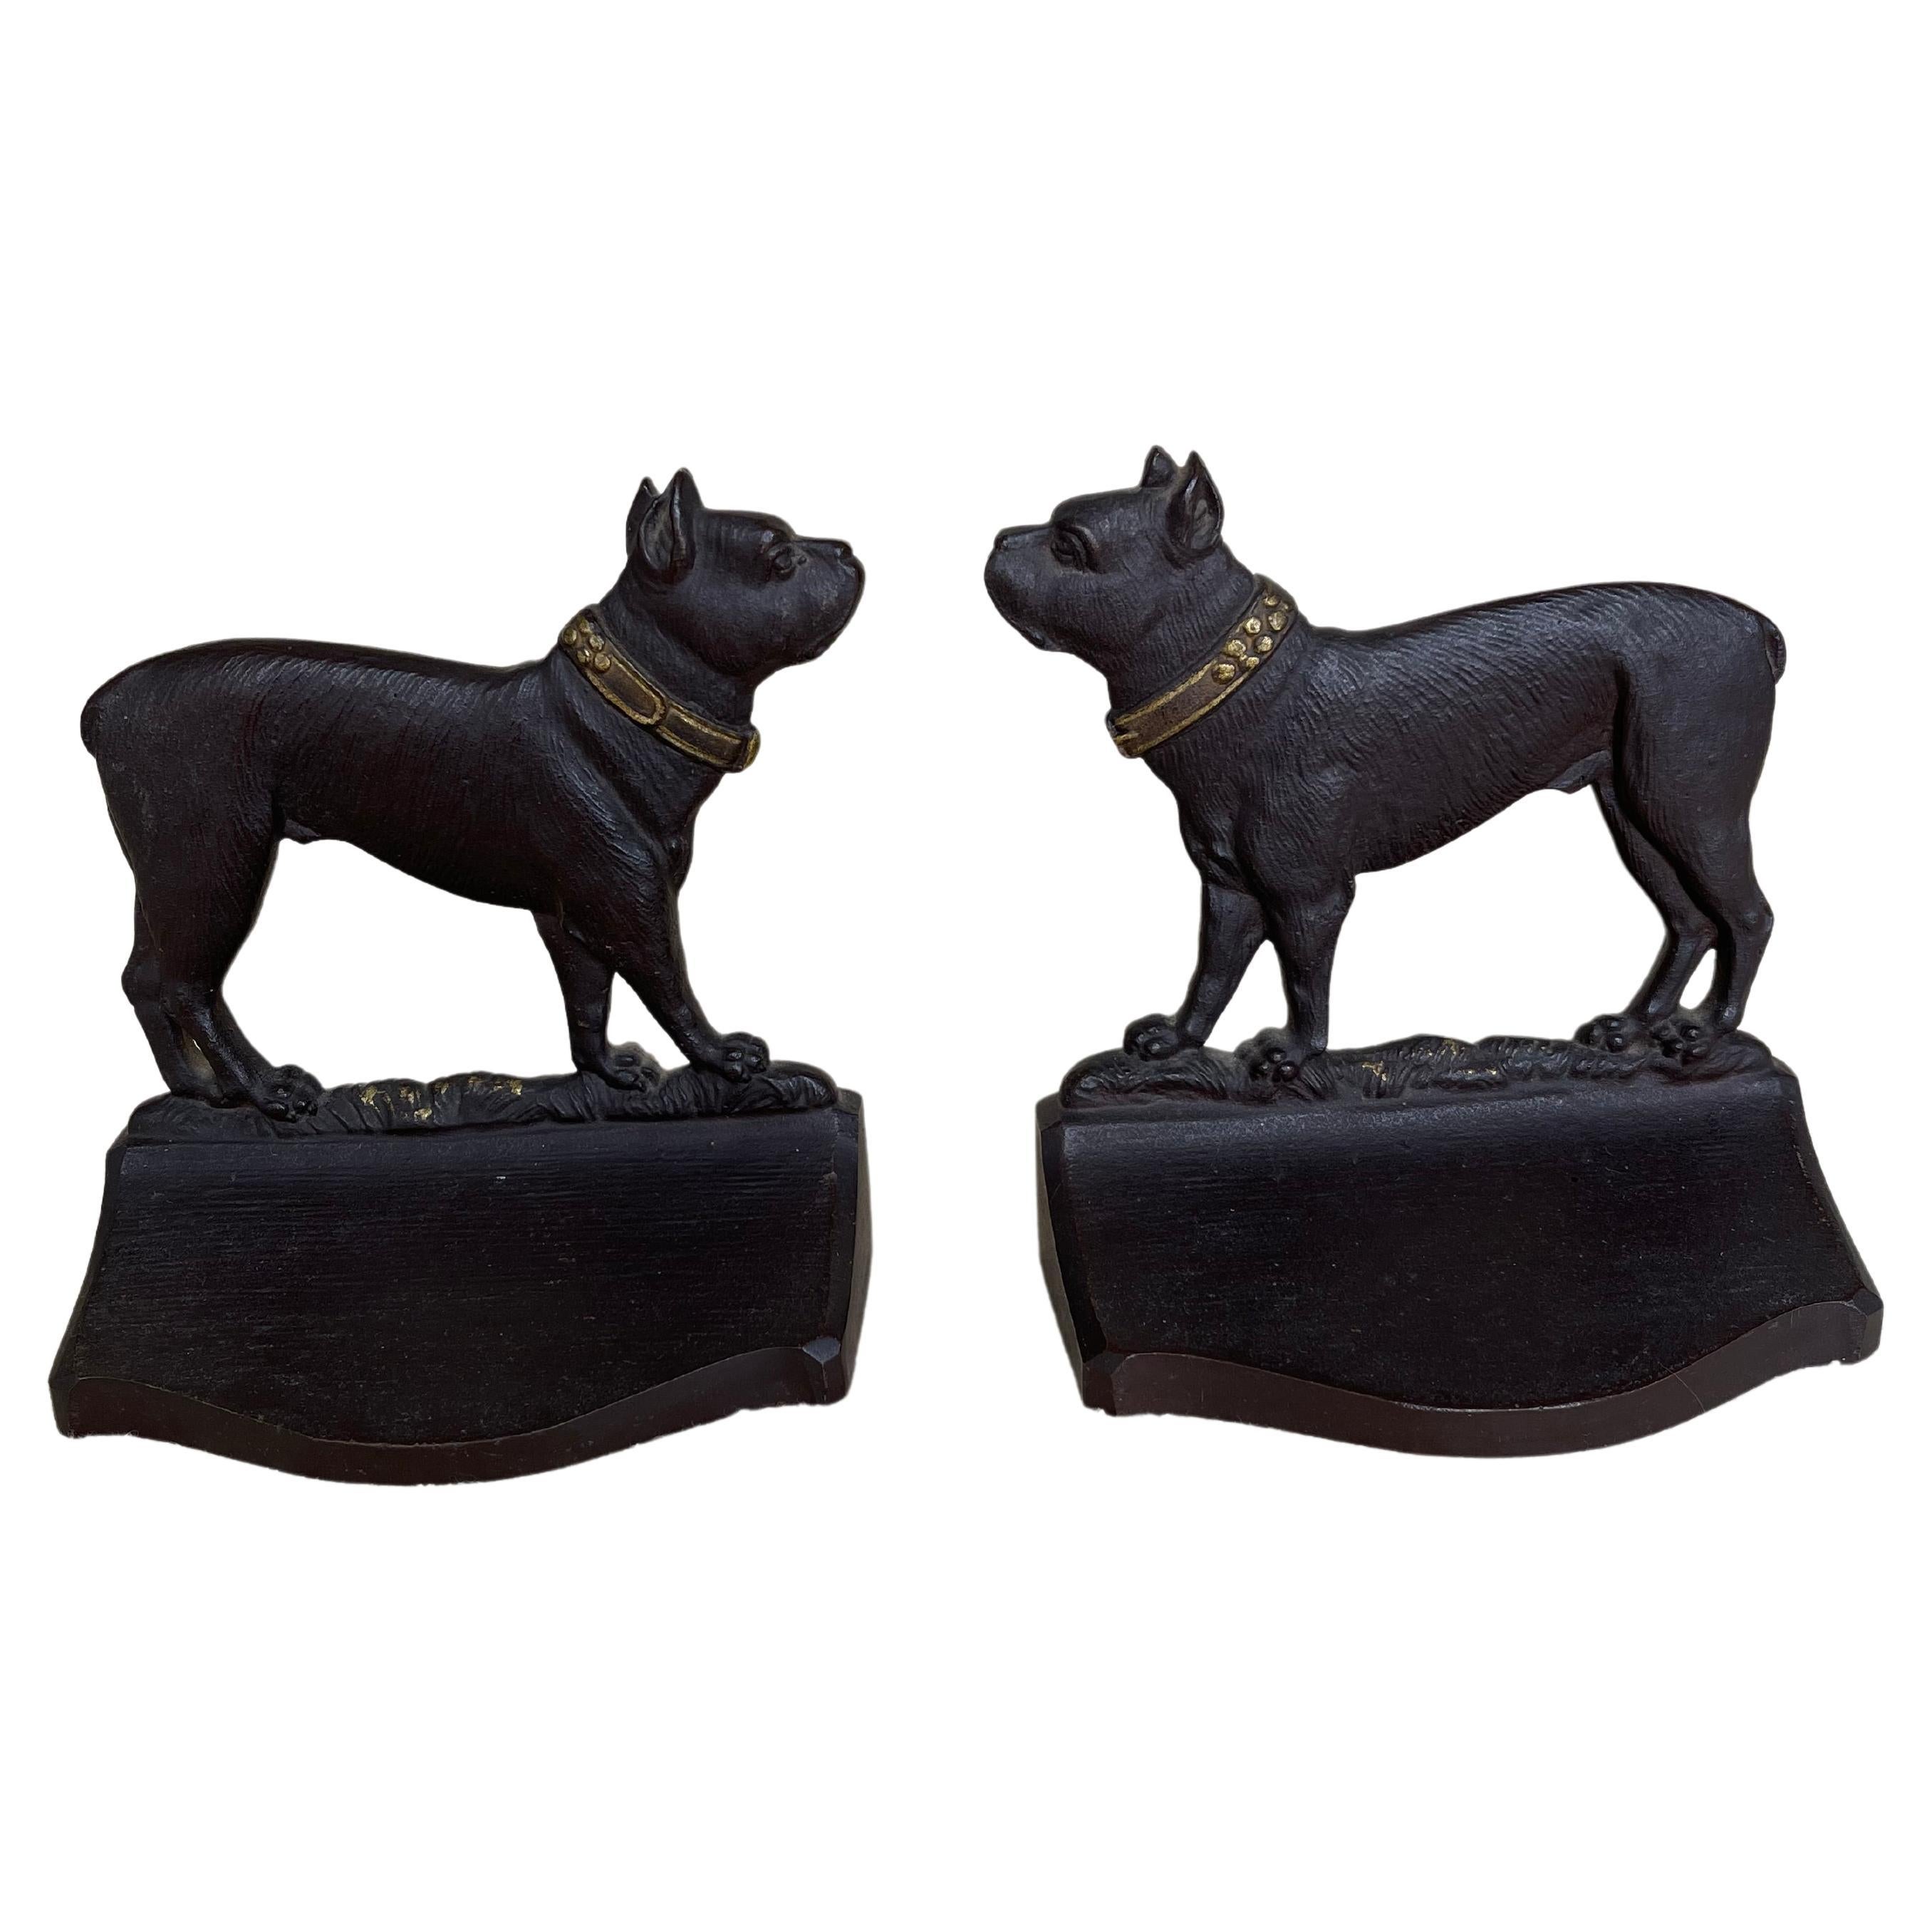  This pair of bookends are quite exceptionally cast. Note the special attention to detail to include the finely cast dog's coat.  Signed on the back 